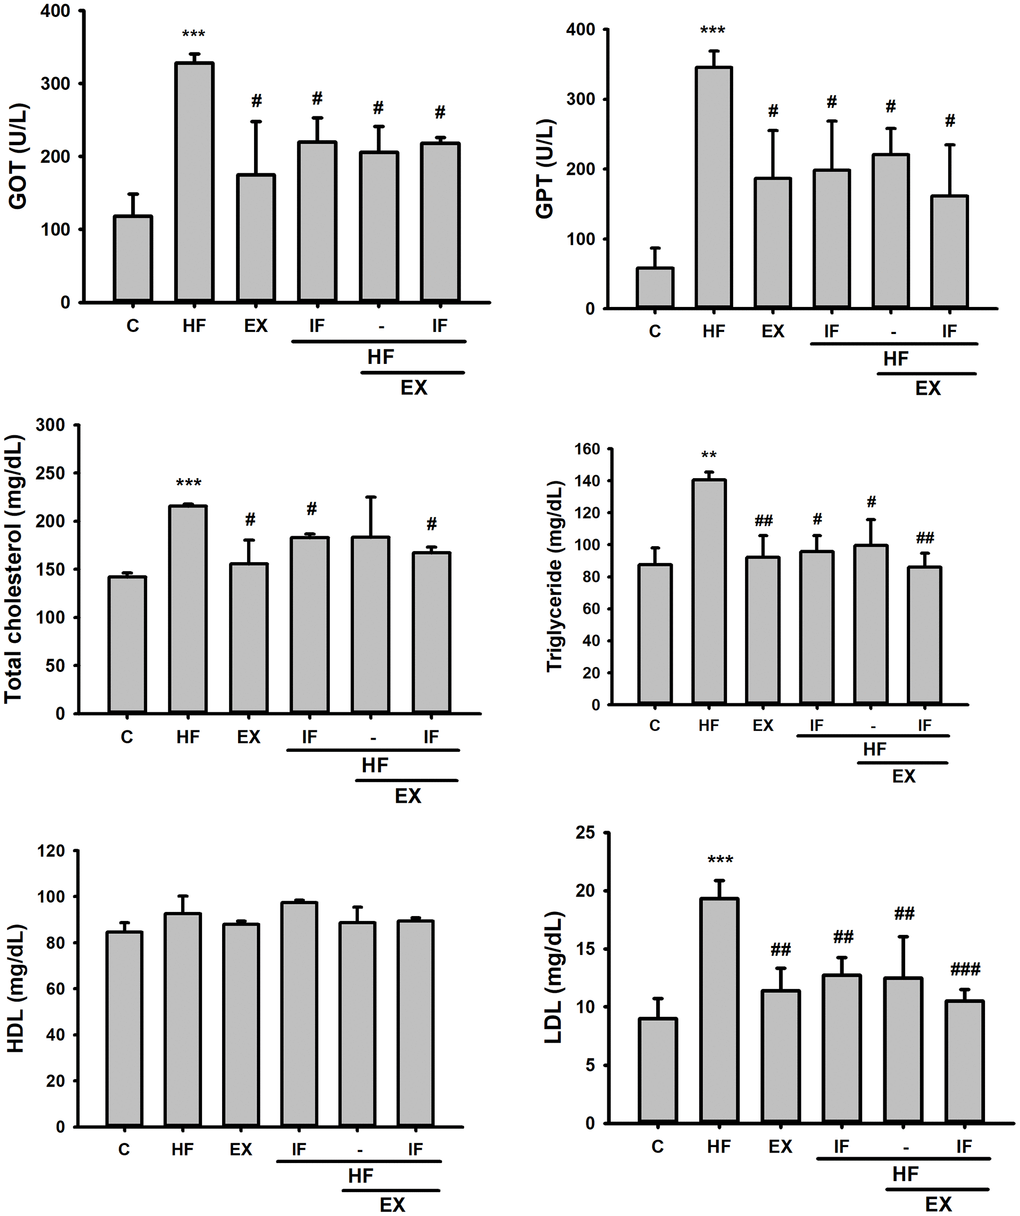 Effect of IF and Exercise on Serum biochemical markers for heart and liver tissue damages. Biochemical analysis after IF administration and 15 weeks of exercise training show the difference in plasma glutamic oxaloacetic transaminase (GOT) and glutamic pyruvic transaminase (GPT) levels and serum levels of total cholesterol, Triglycerides, high-density lipoprotein cholesterol (HDL-C), low-density lipoprotein cholesterol (LDL-C) and blood glucose among the different SAMP8 mice groups (n=6). C: Control; HF: High-fat diet; EX: Exercise; HF+IF: High-fat diet+IF; HF+EX: High-fat diet+ Exercise; HF+EX+IF: High-fat diet+ Exercise+ IF. Bars indicate the mean ± SEM obtained from experiments performed in triplicate. **P***P#P##P